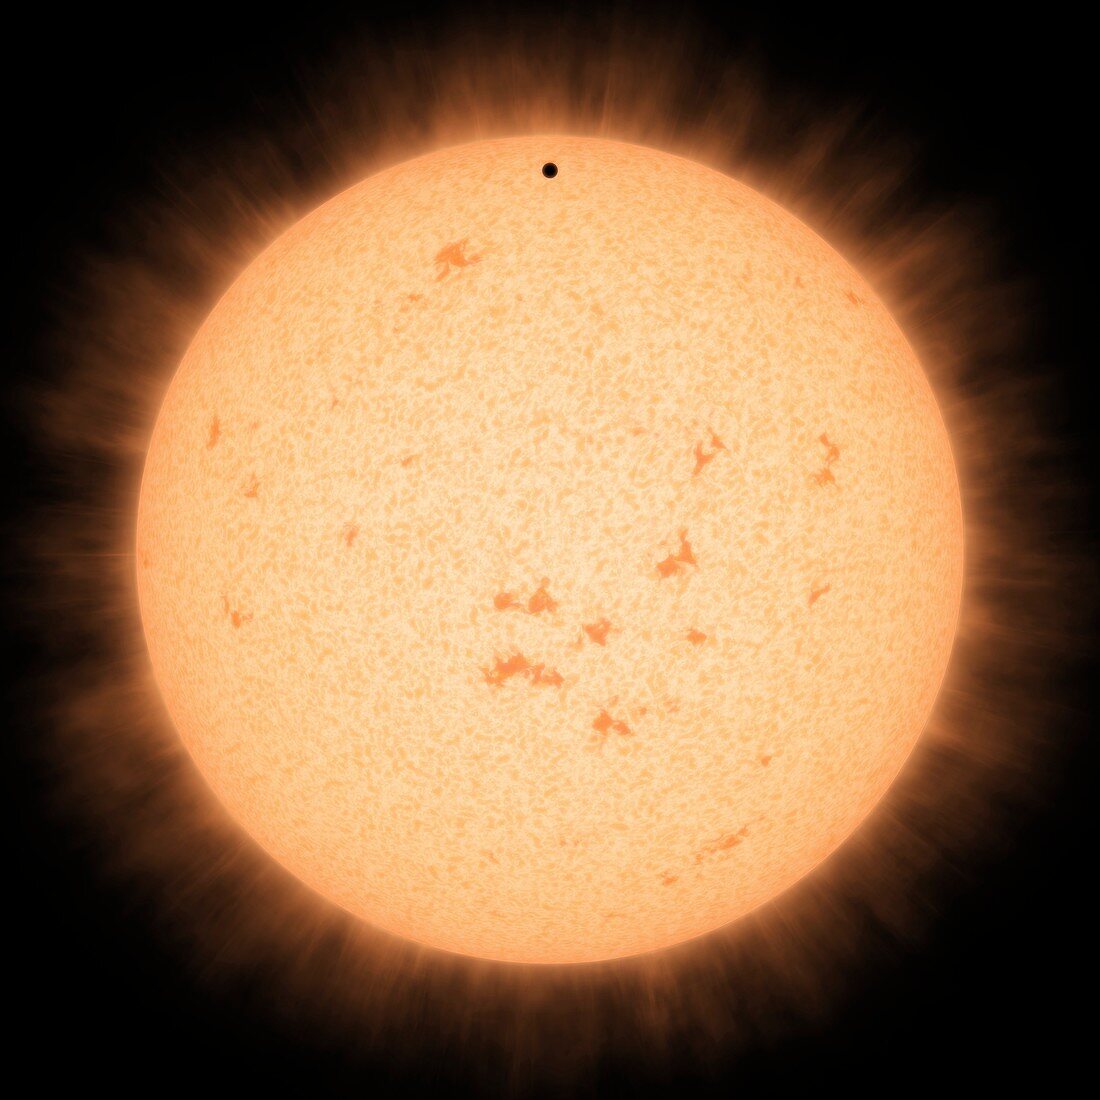 Planet passing in front of a star, illustration